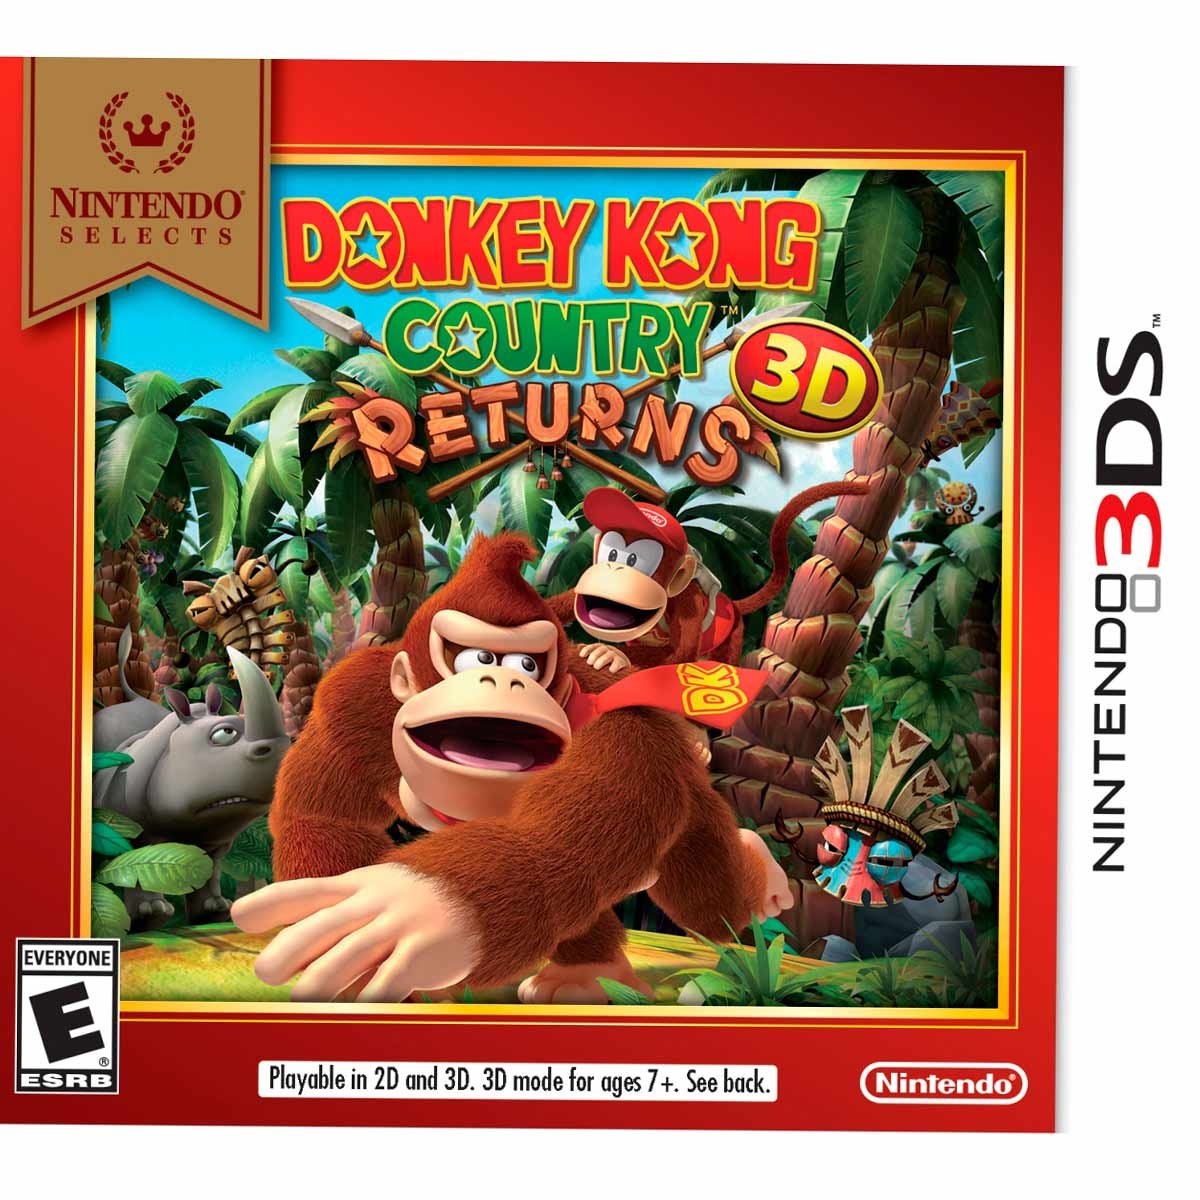 3Ds Donkey Kong Nintendo Country Returns